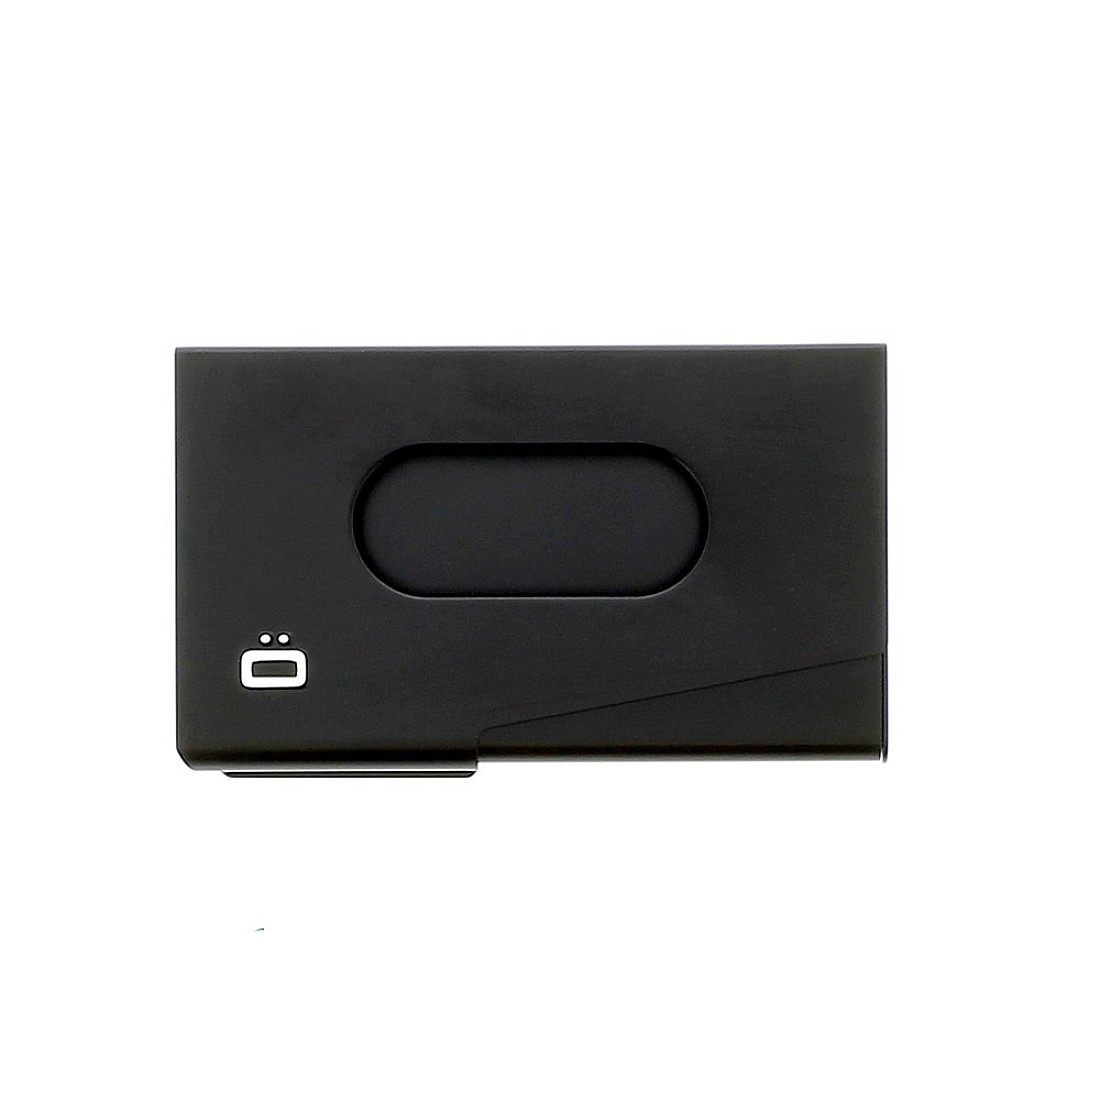 Ögon Designs One Touch Black Business Card Holder